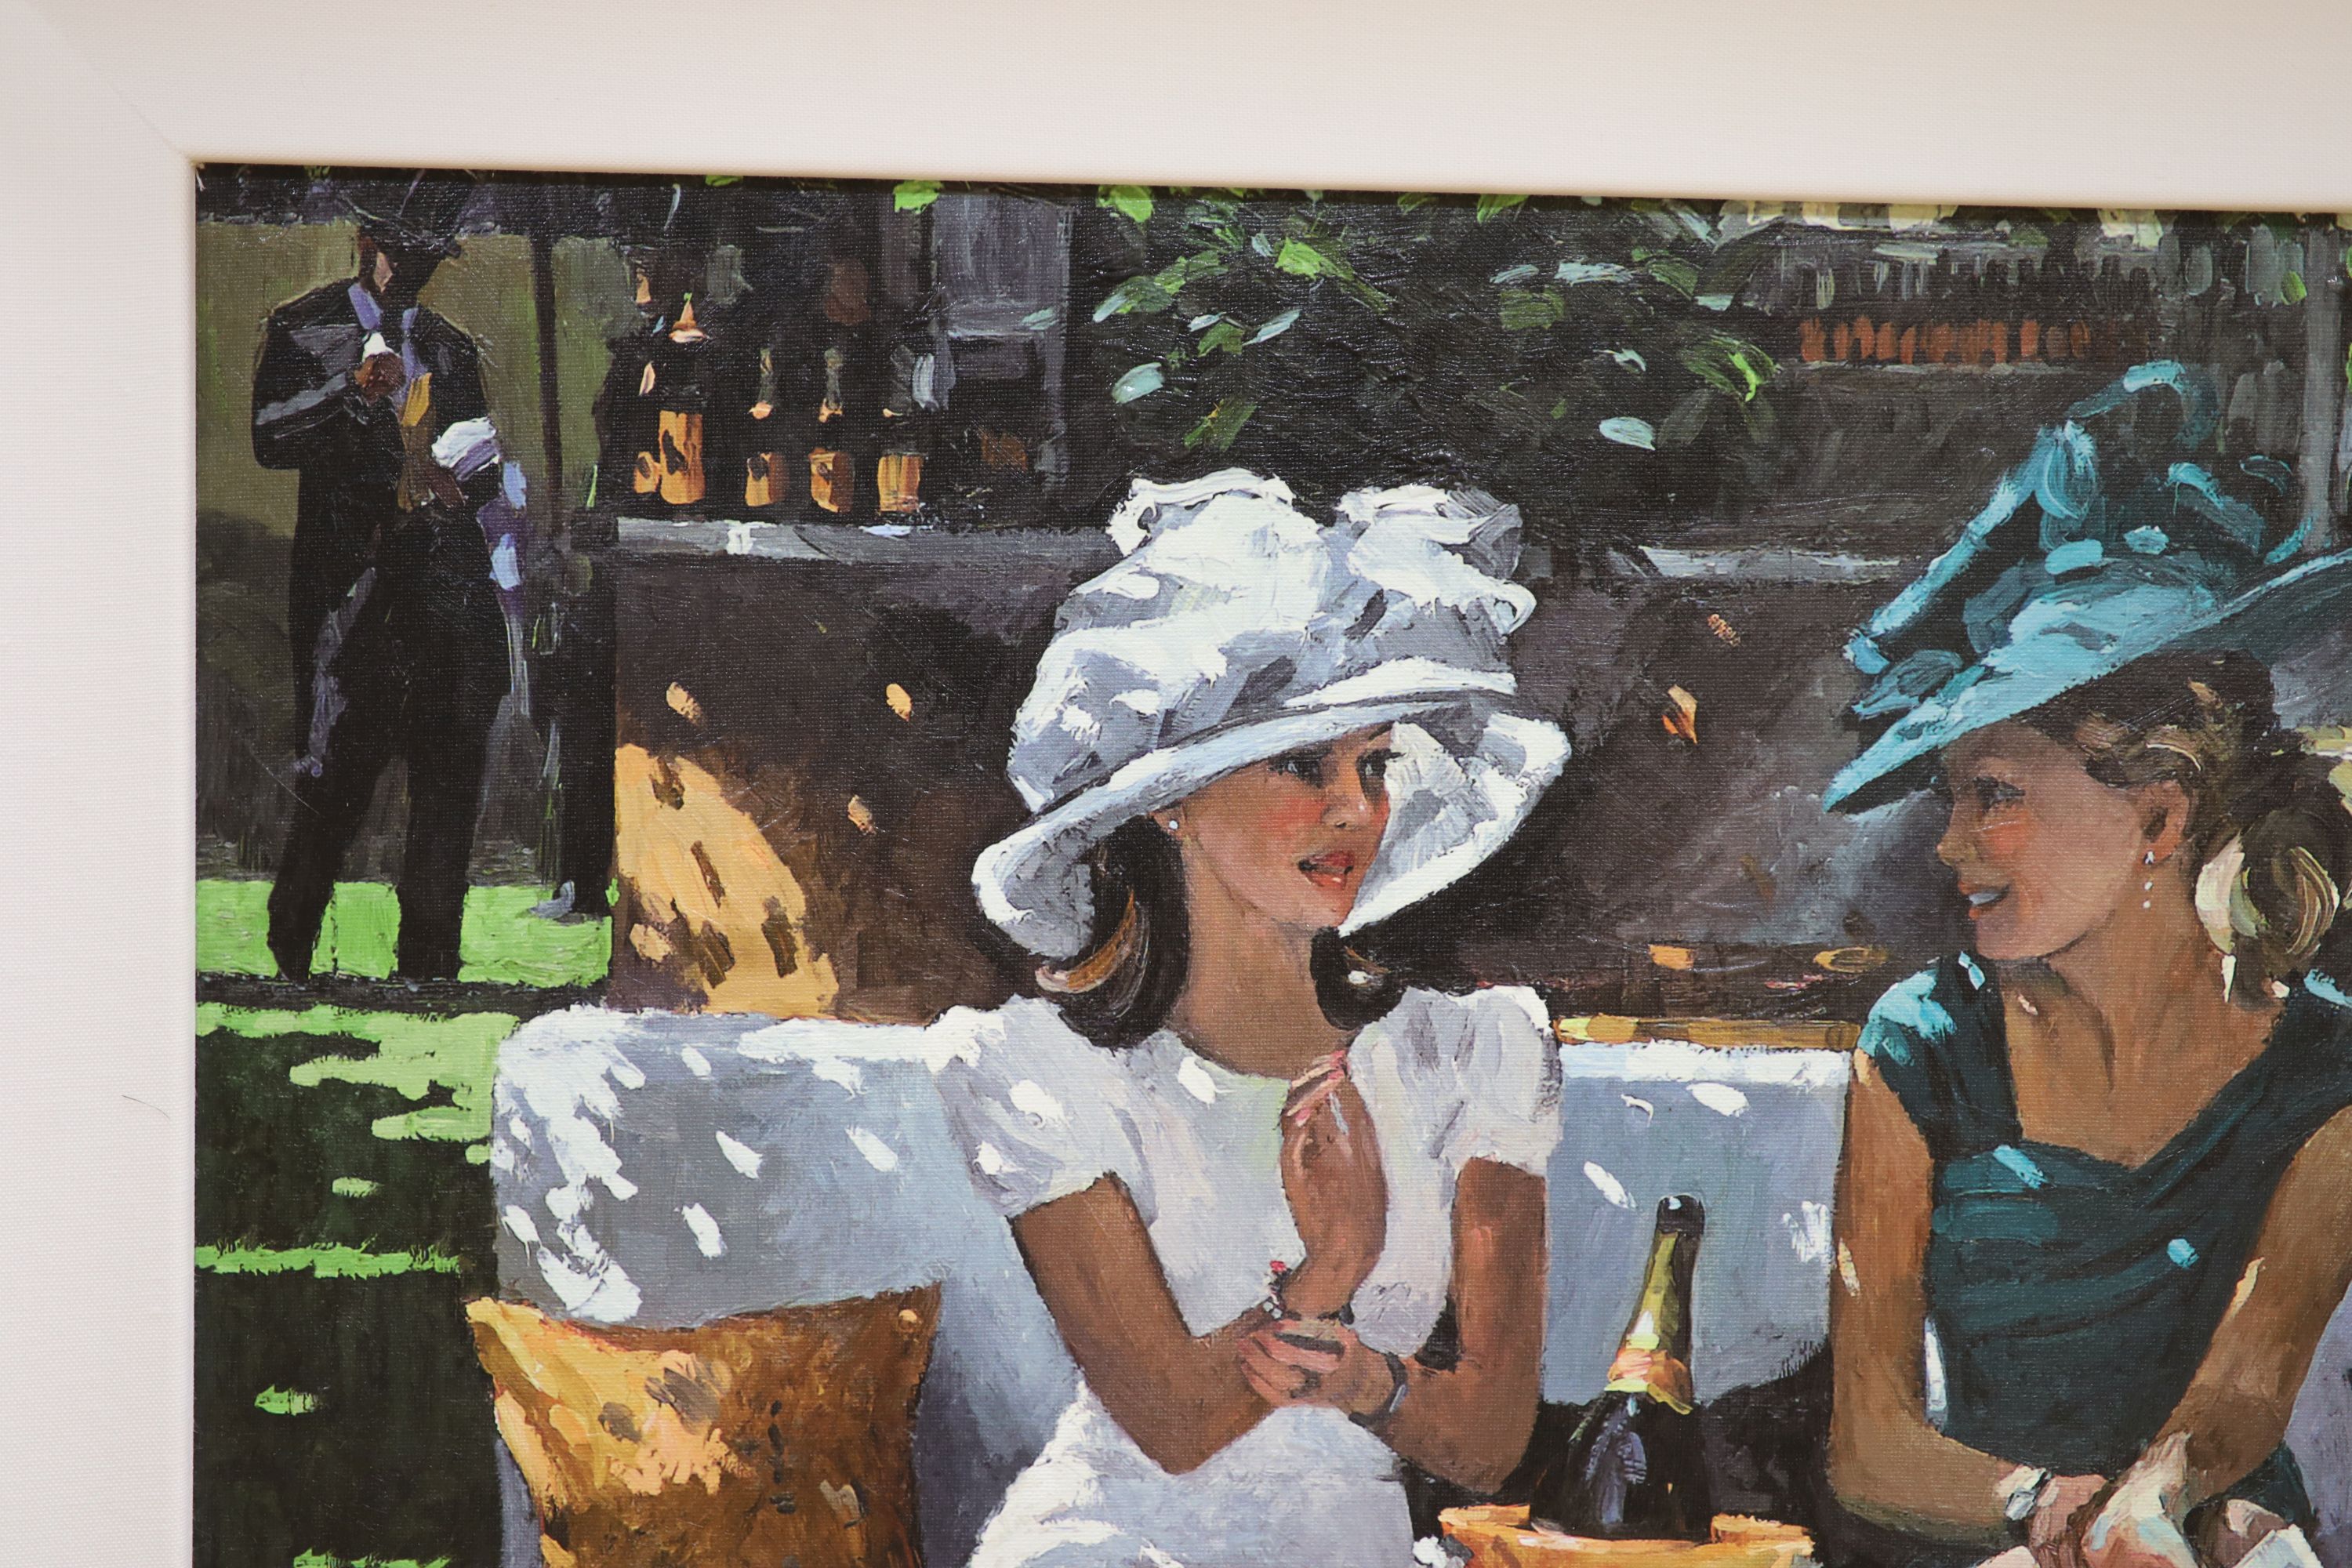 Sherree Valentine Daines, embellished canvas on board, 'Champagne Rendezvous', 76/195, with COA, 54 x 65cm